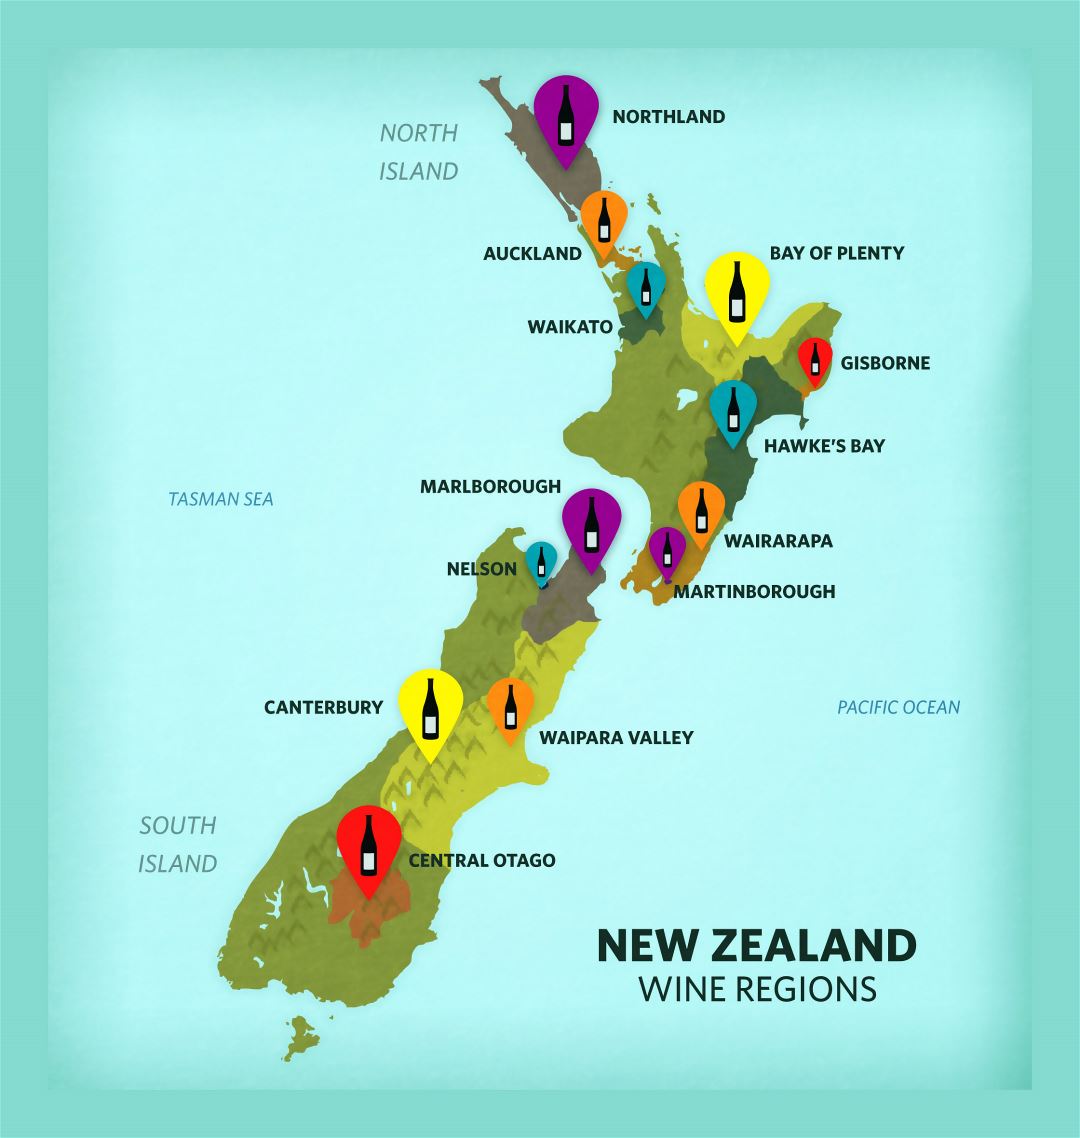 Large wine regions map of New Zealand